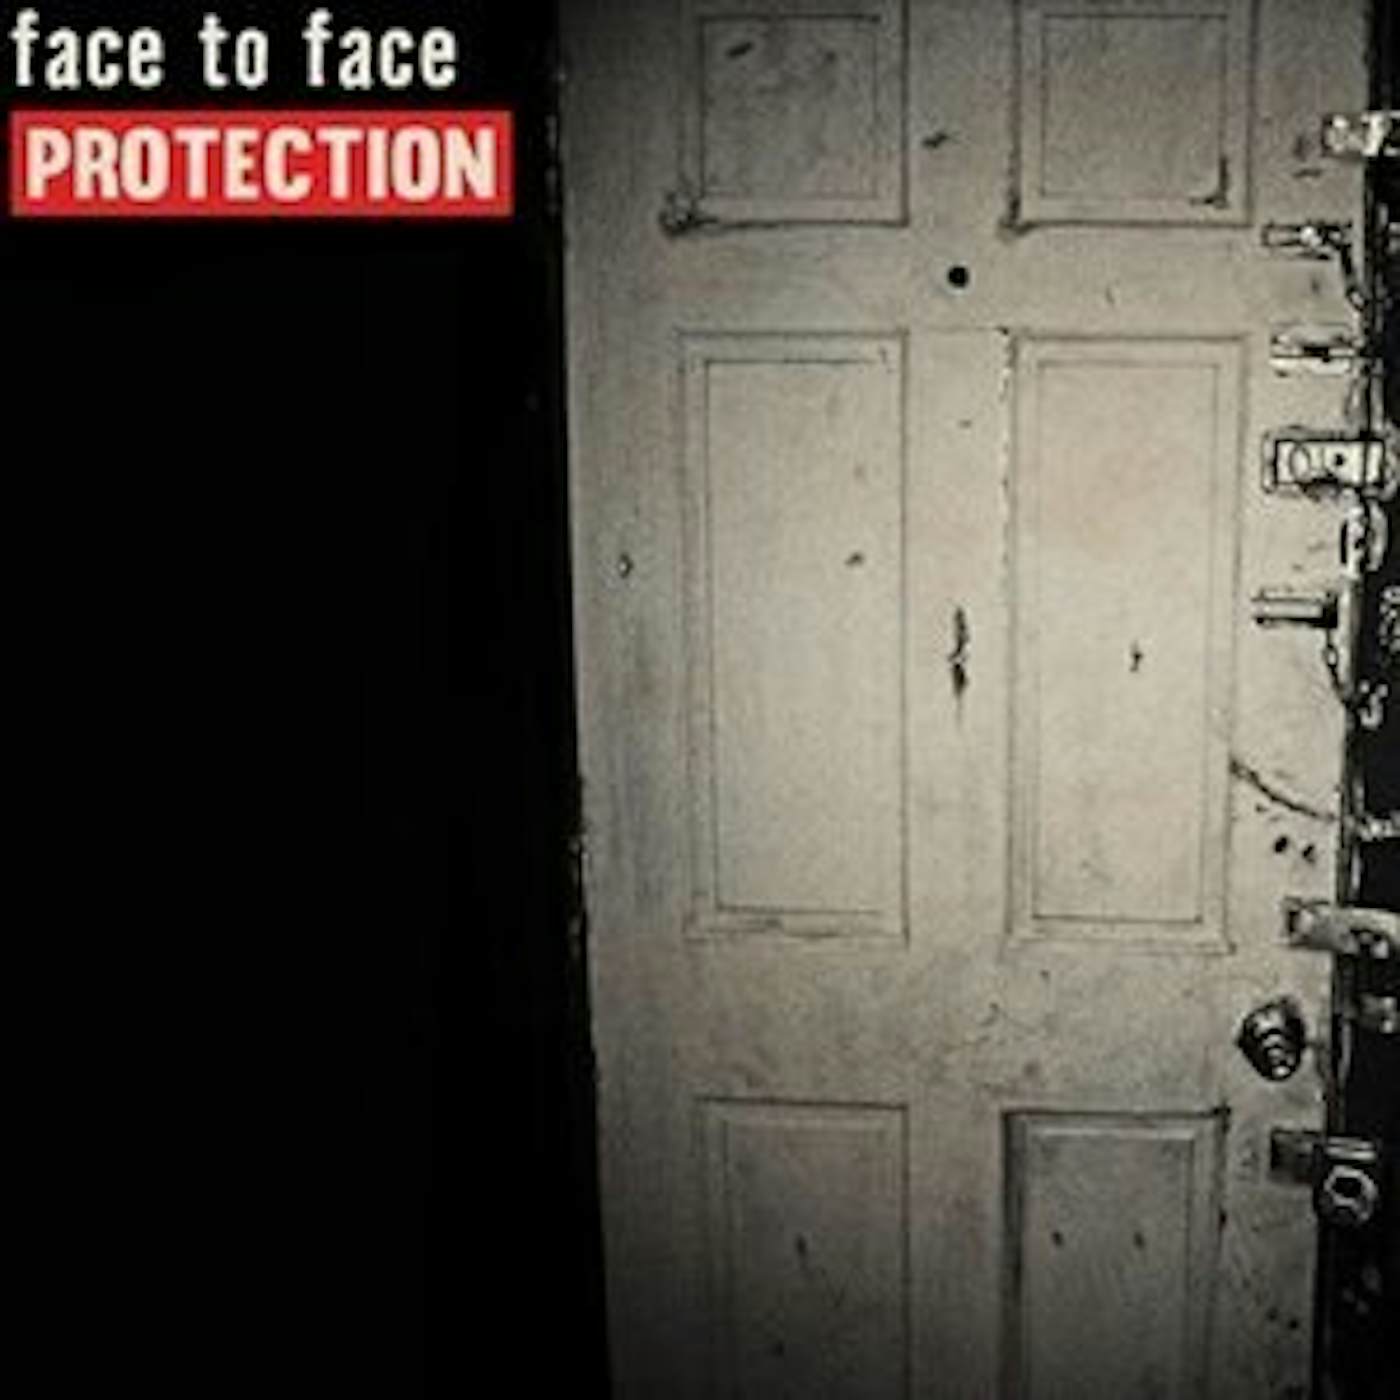 Face To Face PROTECTION CD